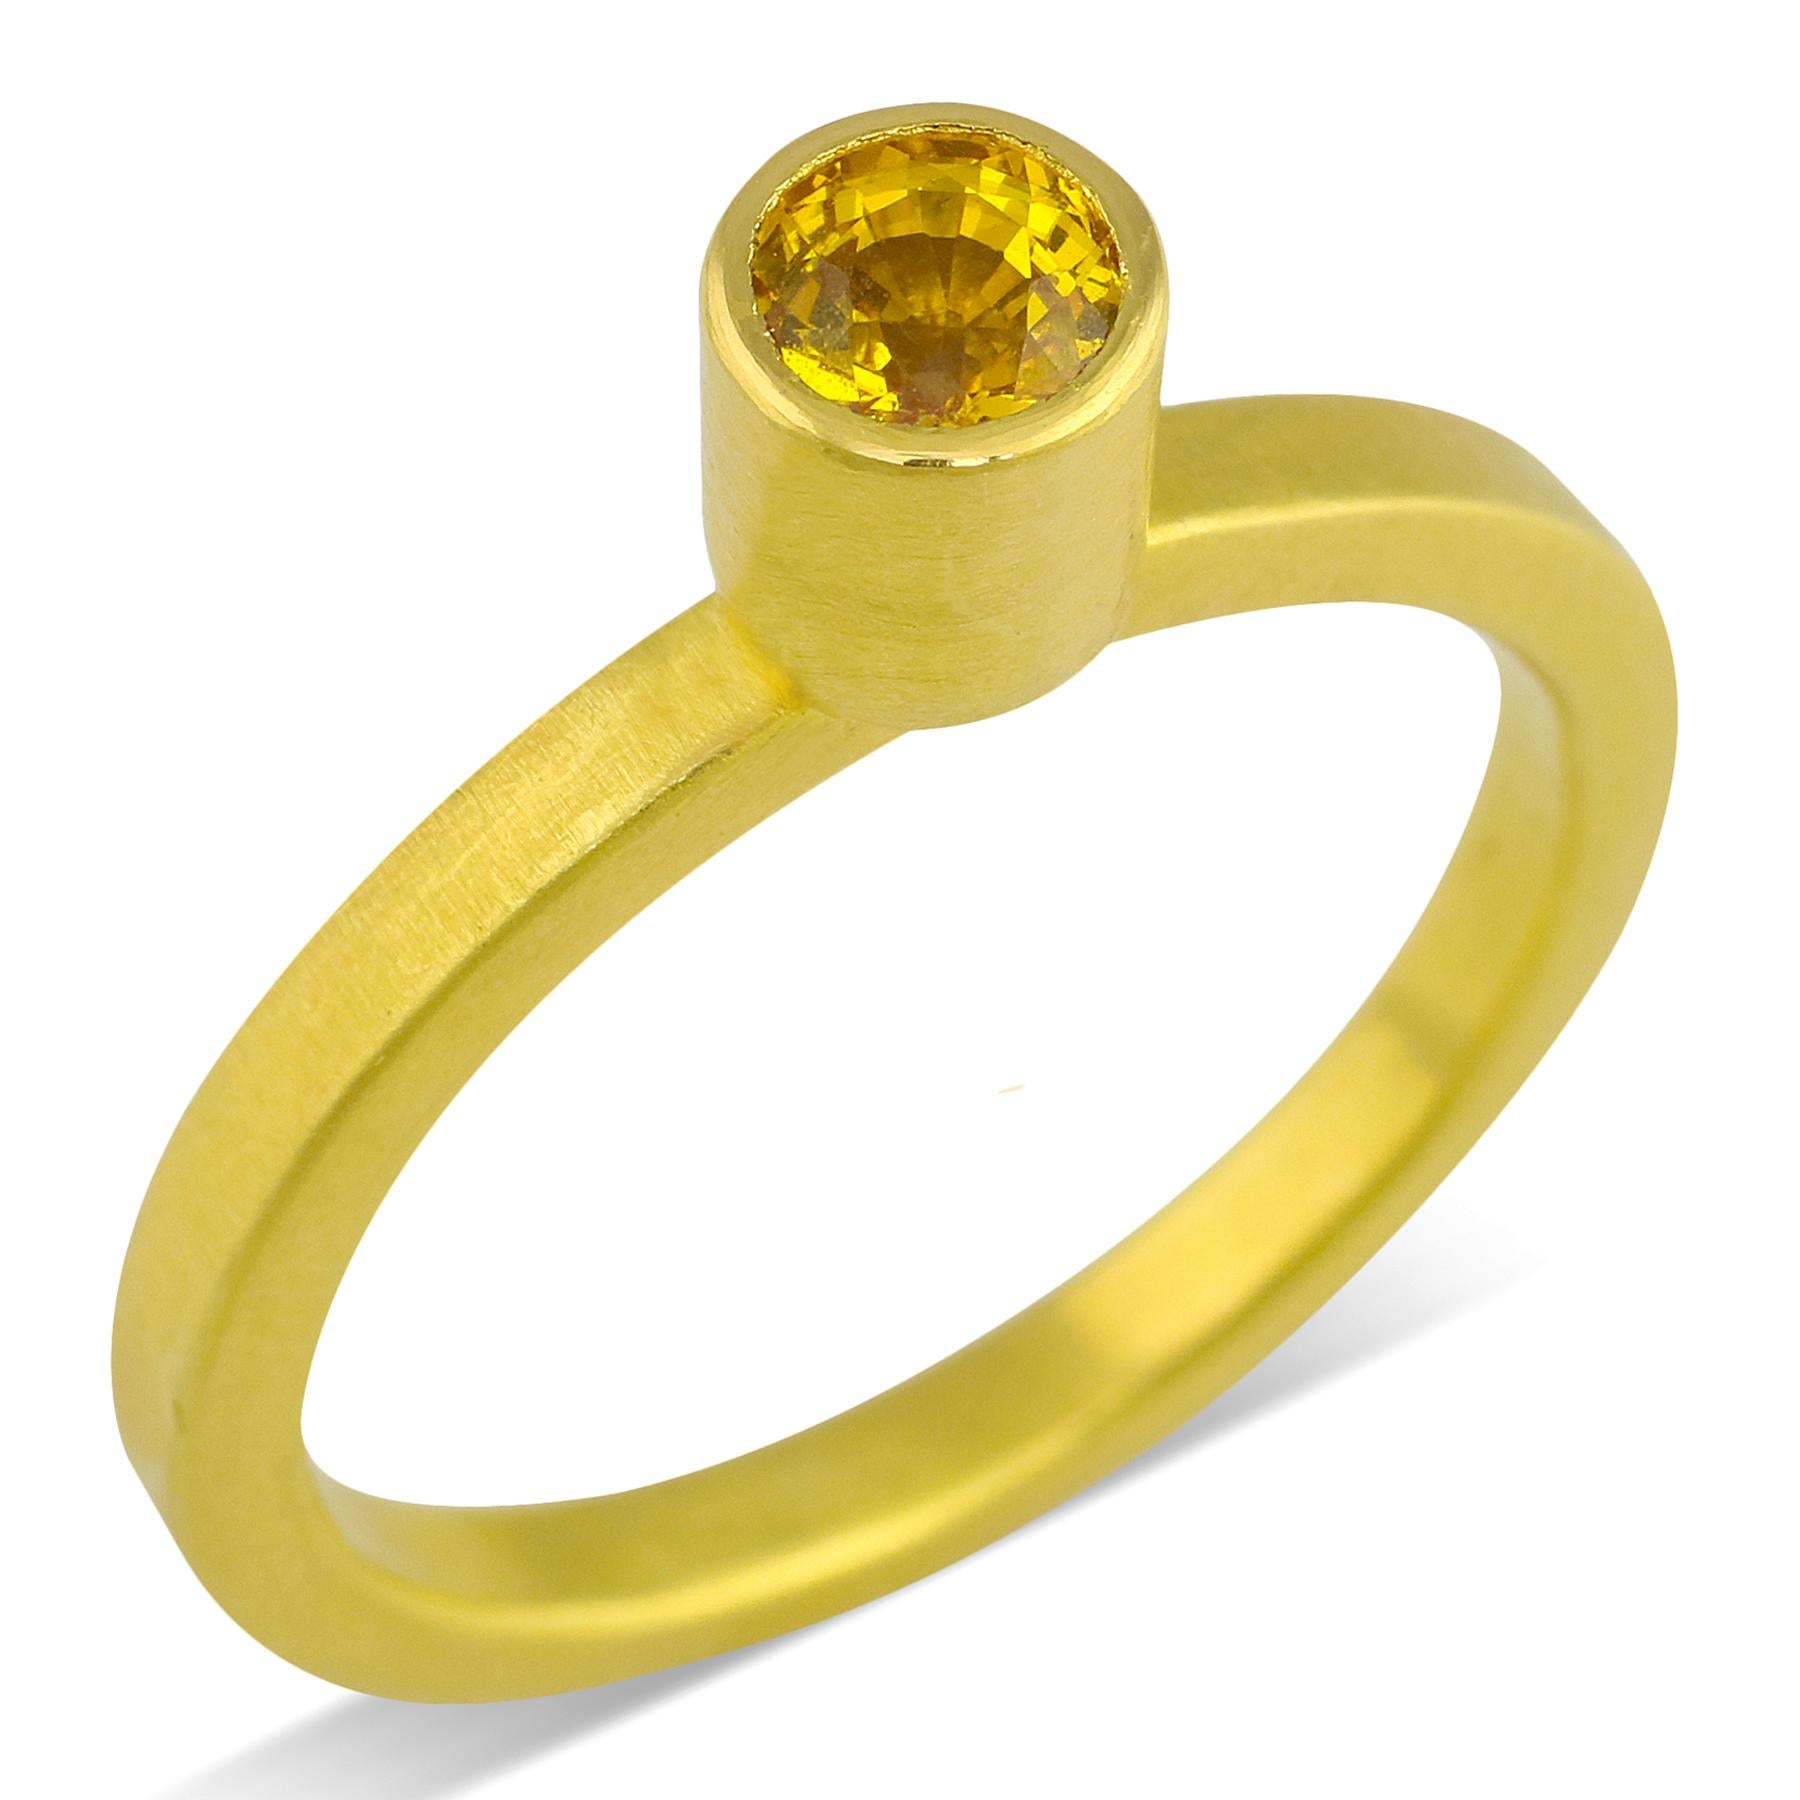 PHILIPPE-SPENCER -   .65 Ct. Round Faceted Yellow Sapphire wrapped in 22K Gold Bezel Setting, with Anvil-Forged Solid 20K Gold 2.25mm x 2mm Band. Heavy Brushed Exterior, Mirror Polish Interior.  Size 8, and is in-stock and ready to ship. Our